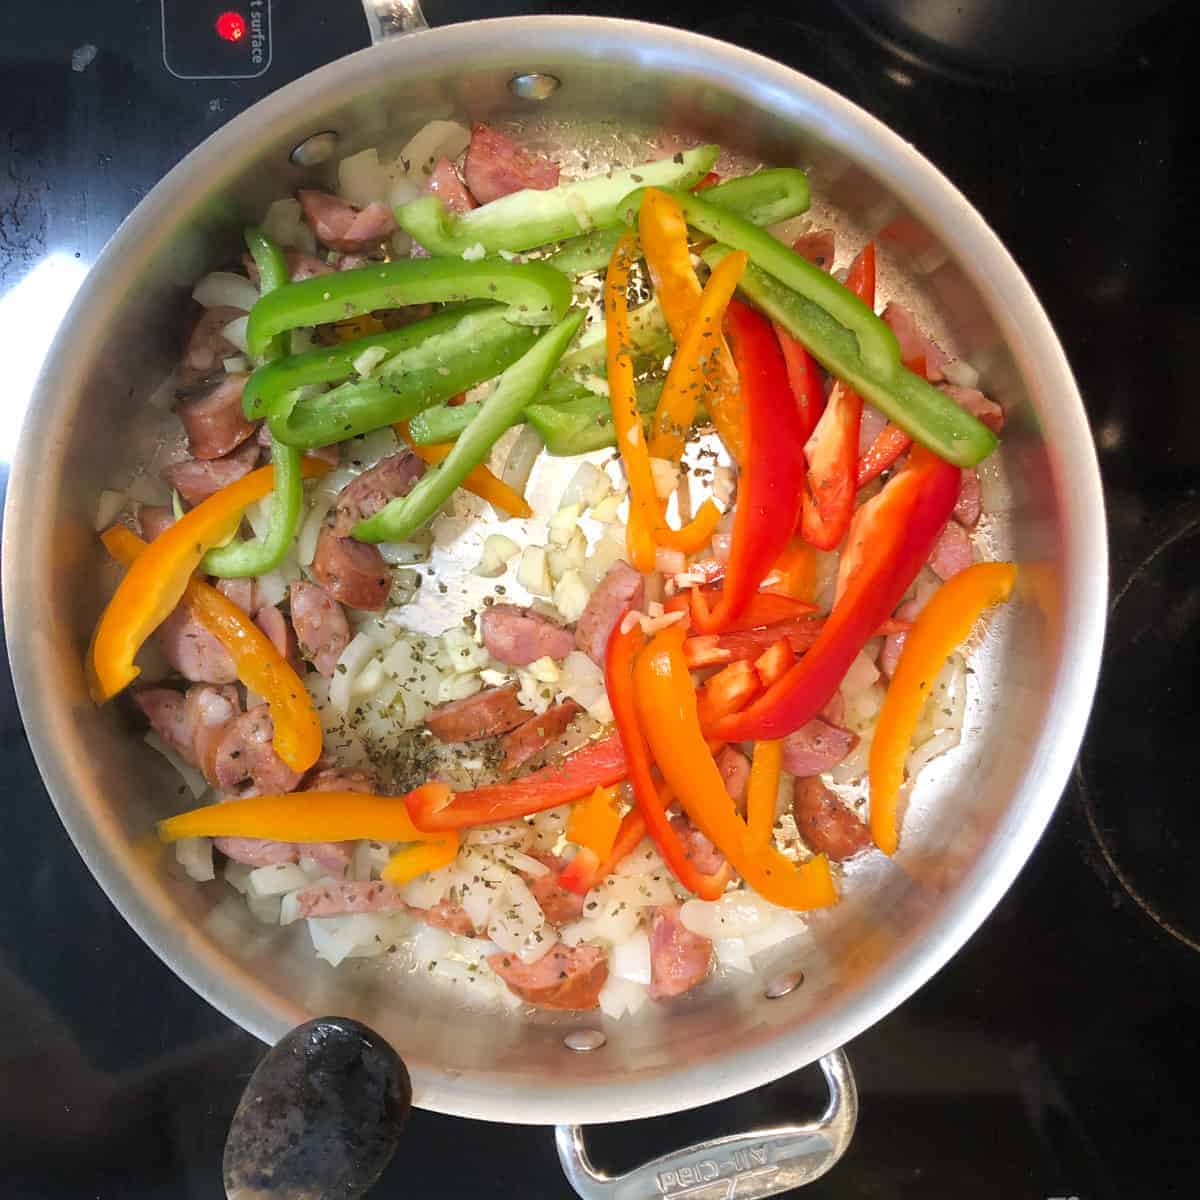 sausage onions, and bell peppers cooking in stainless stell skillet.